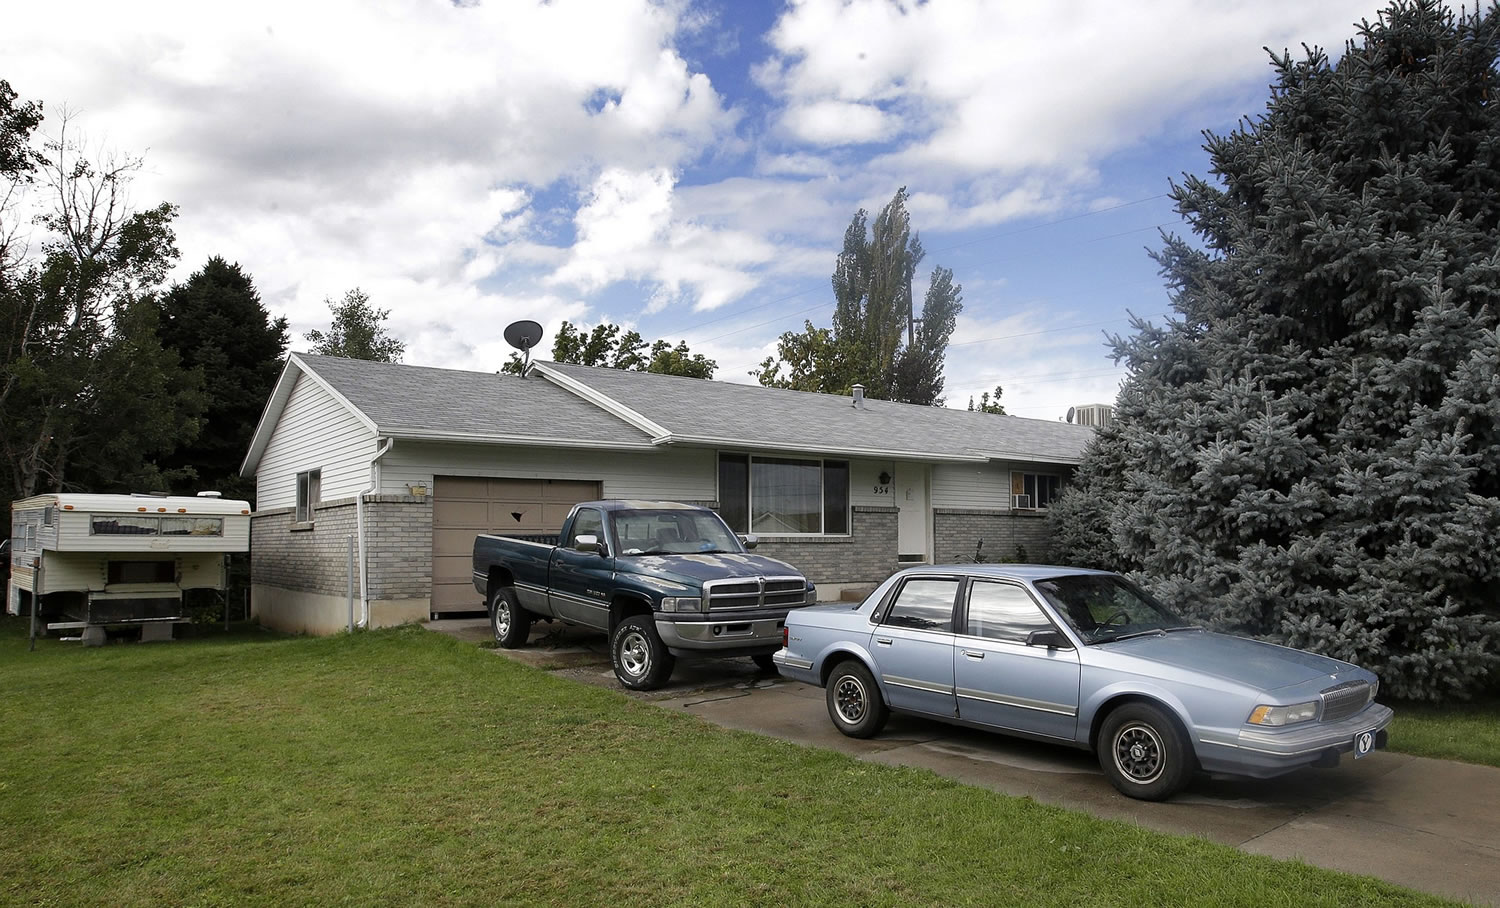 The home where five Utah family members were found dead in their home, in Springville, Utah.